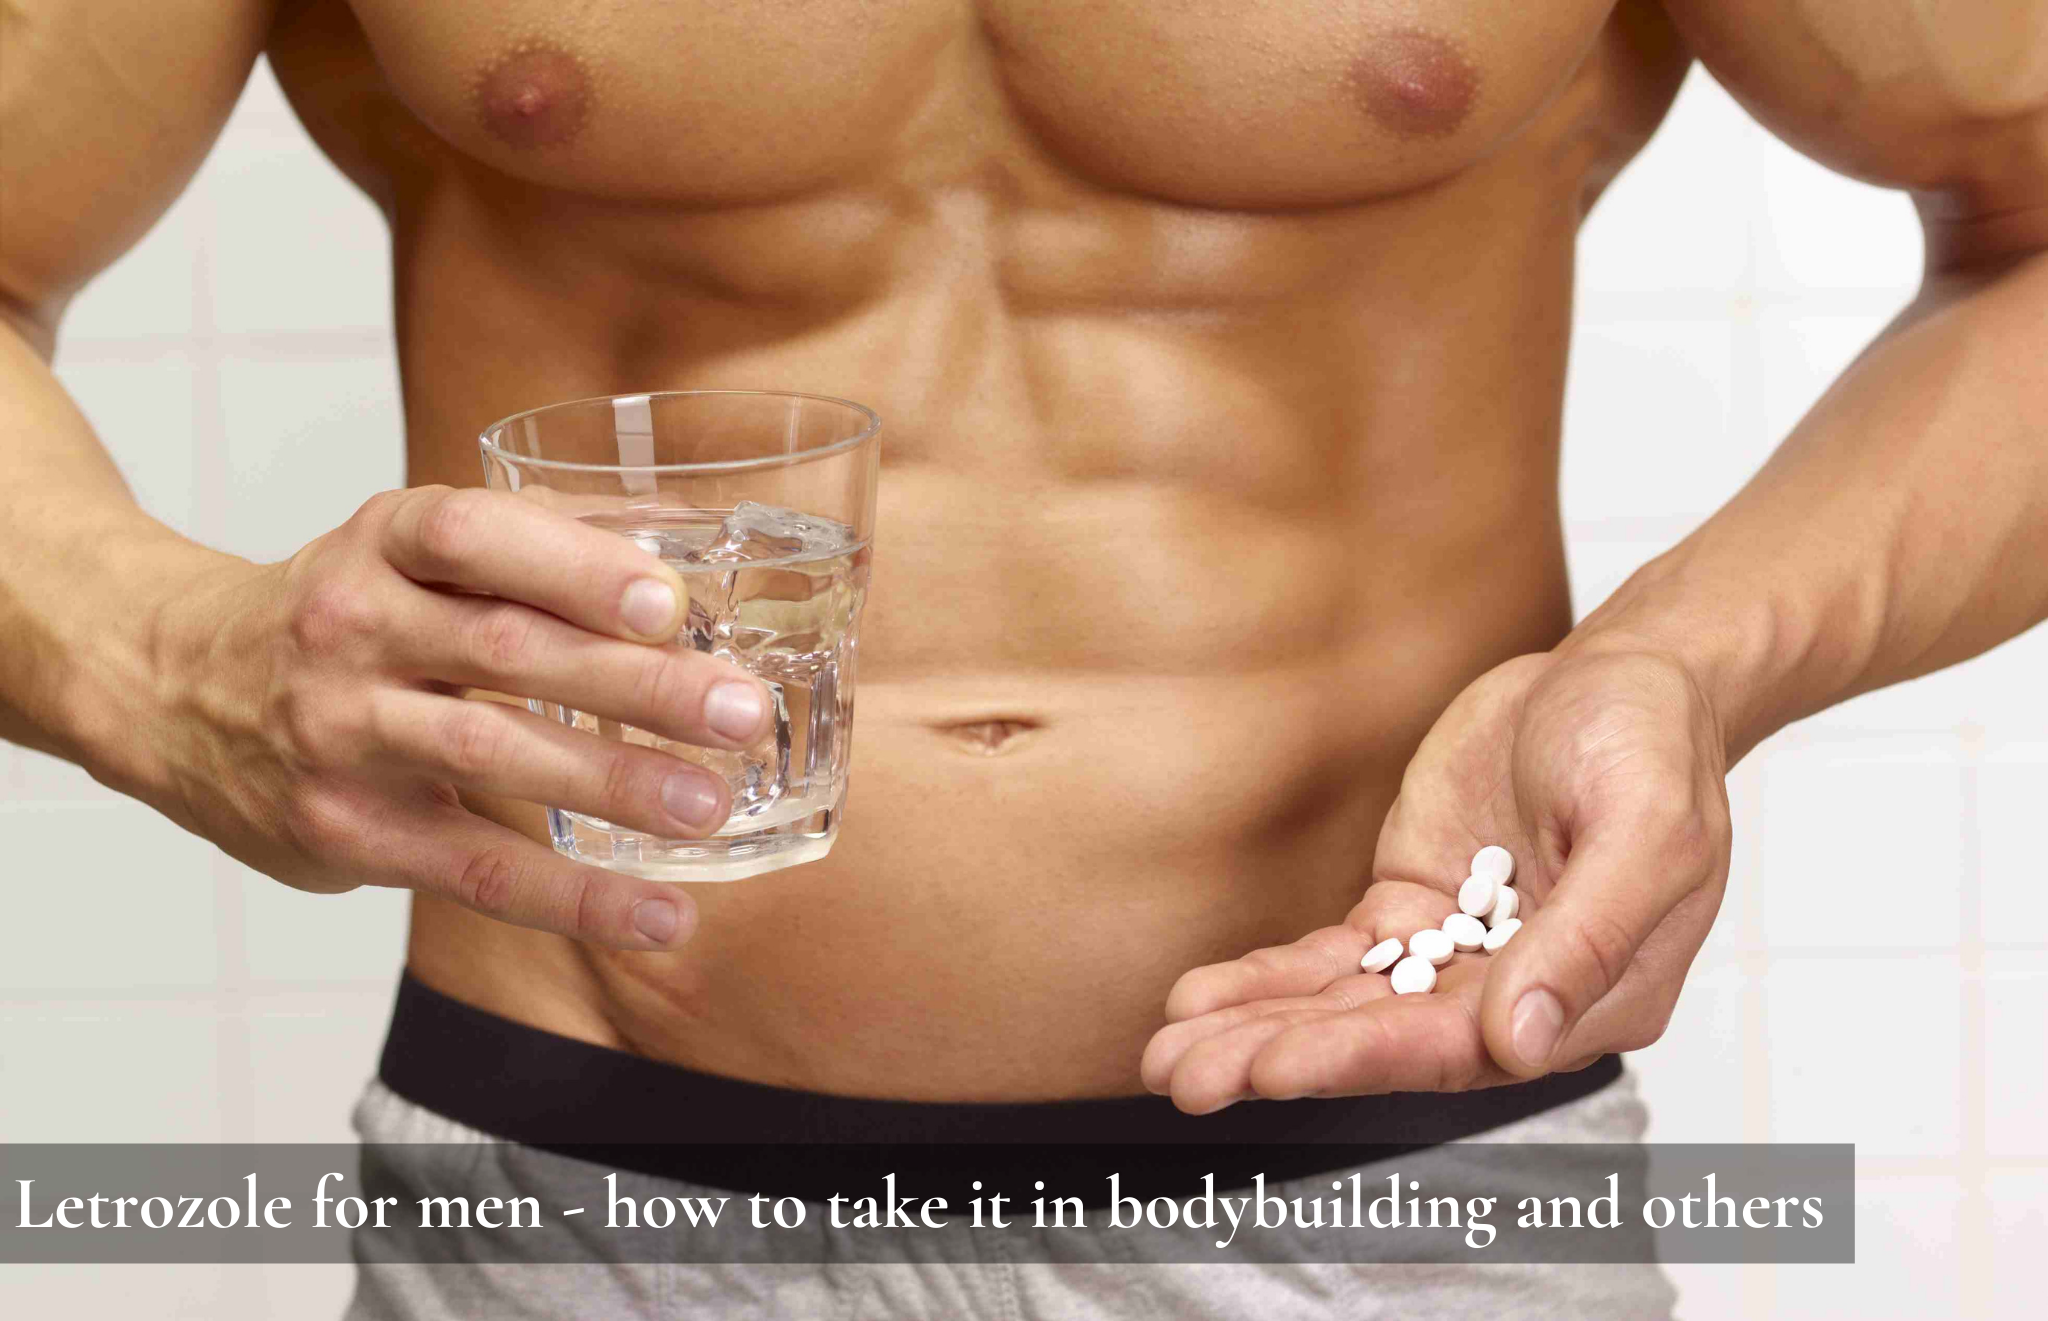 Letrozole for men - how to take it in bodybuilding and others